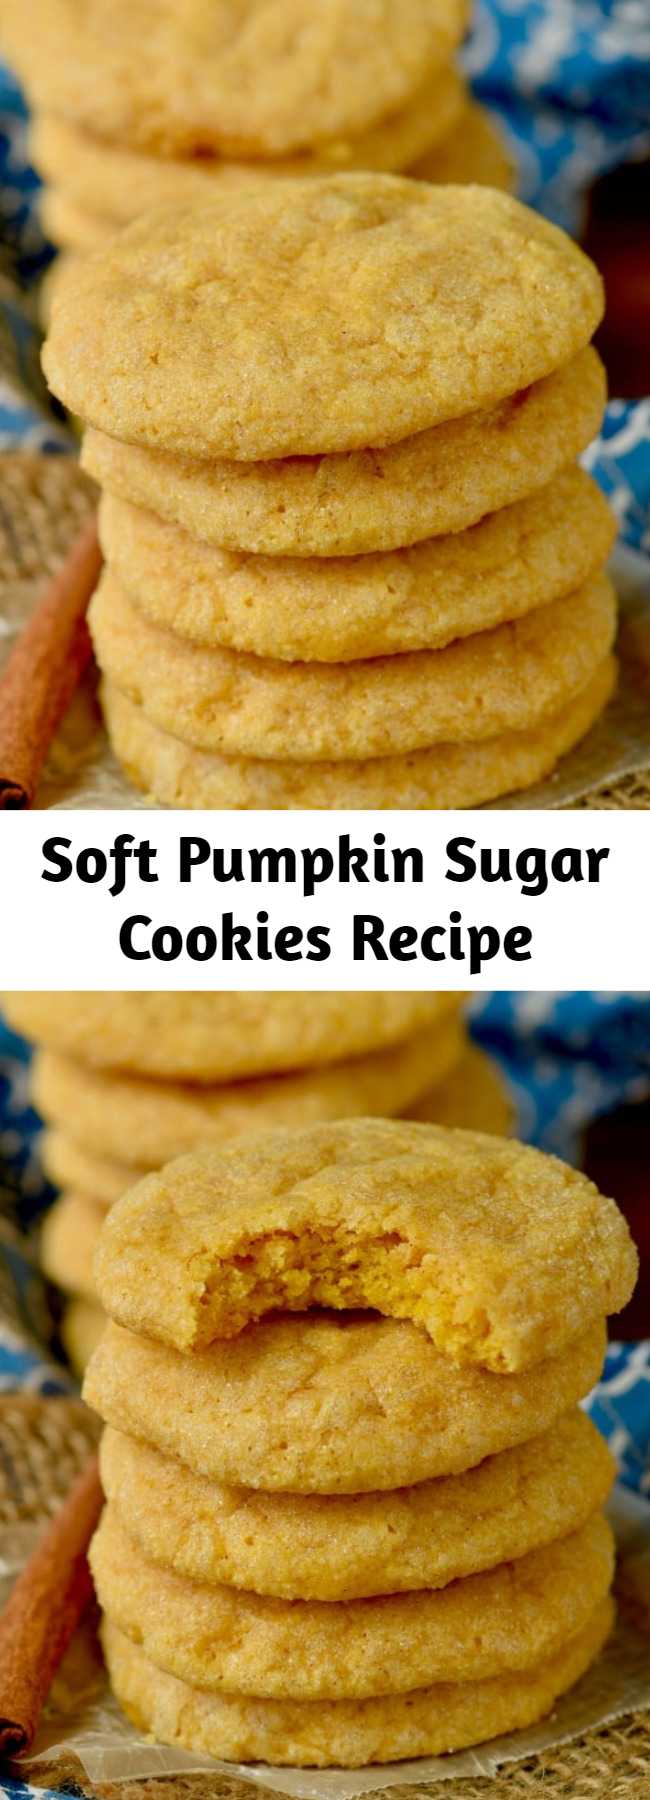 Soft Pumpkin Sugar Cookies Recipe - Pumpkin Sugar Cookies are absolutely amazing! Deliciously soft sugar cookies, full of pumpkin fall flavor! This easy pumpkin cookies recipe is bound to become a family favorite!